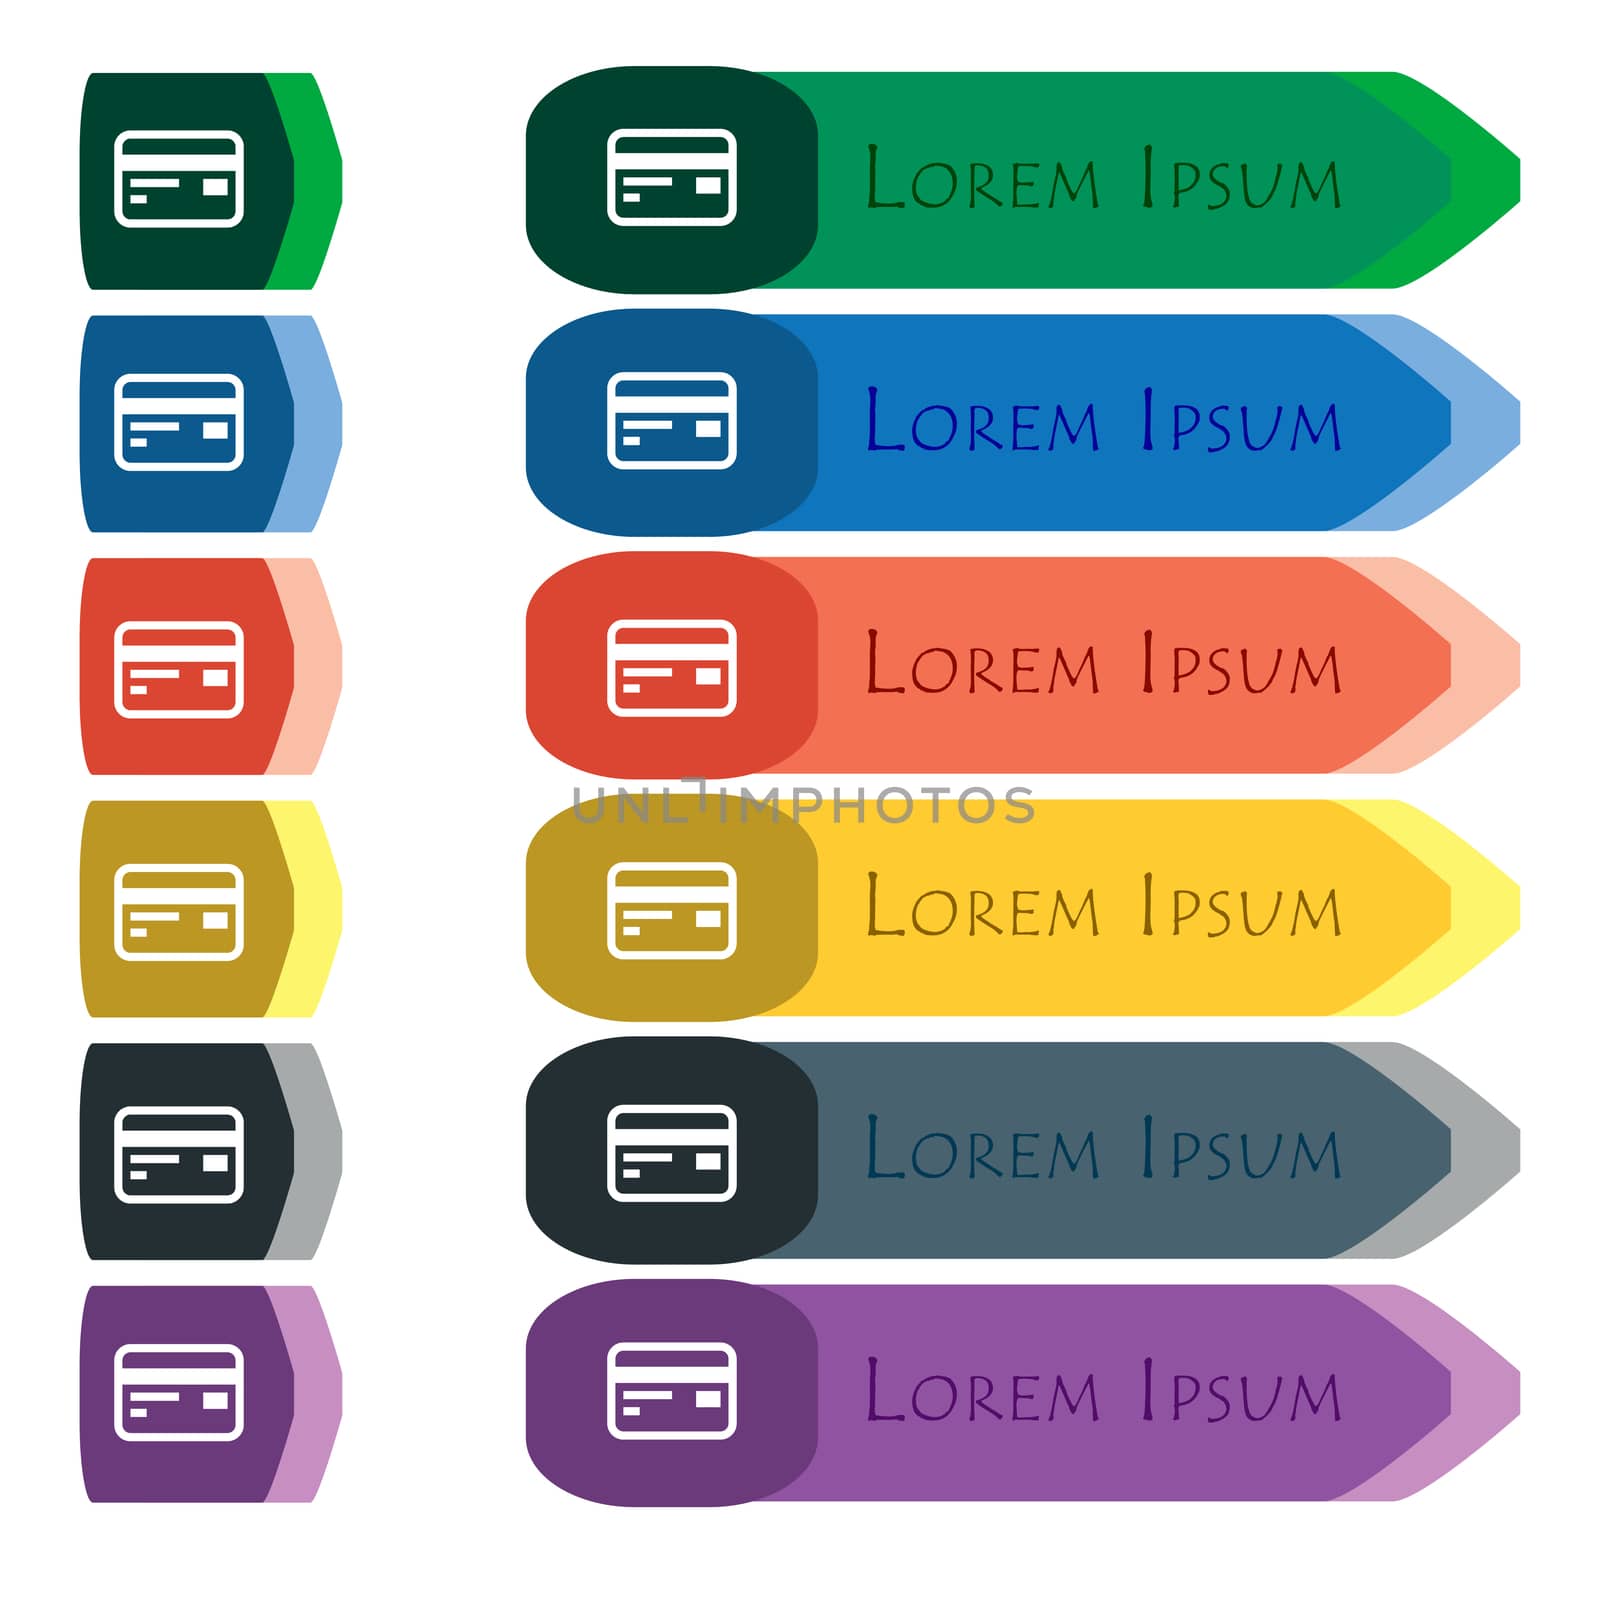 Credit, debit card icon sign. Set of colorful, bright long buttons with additional small modules. Flat design. 